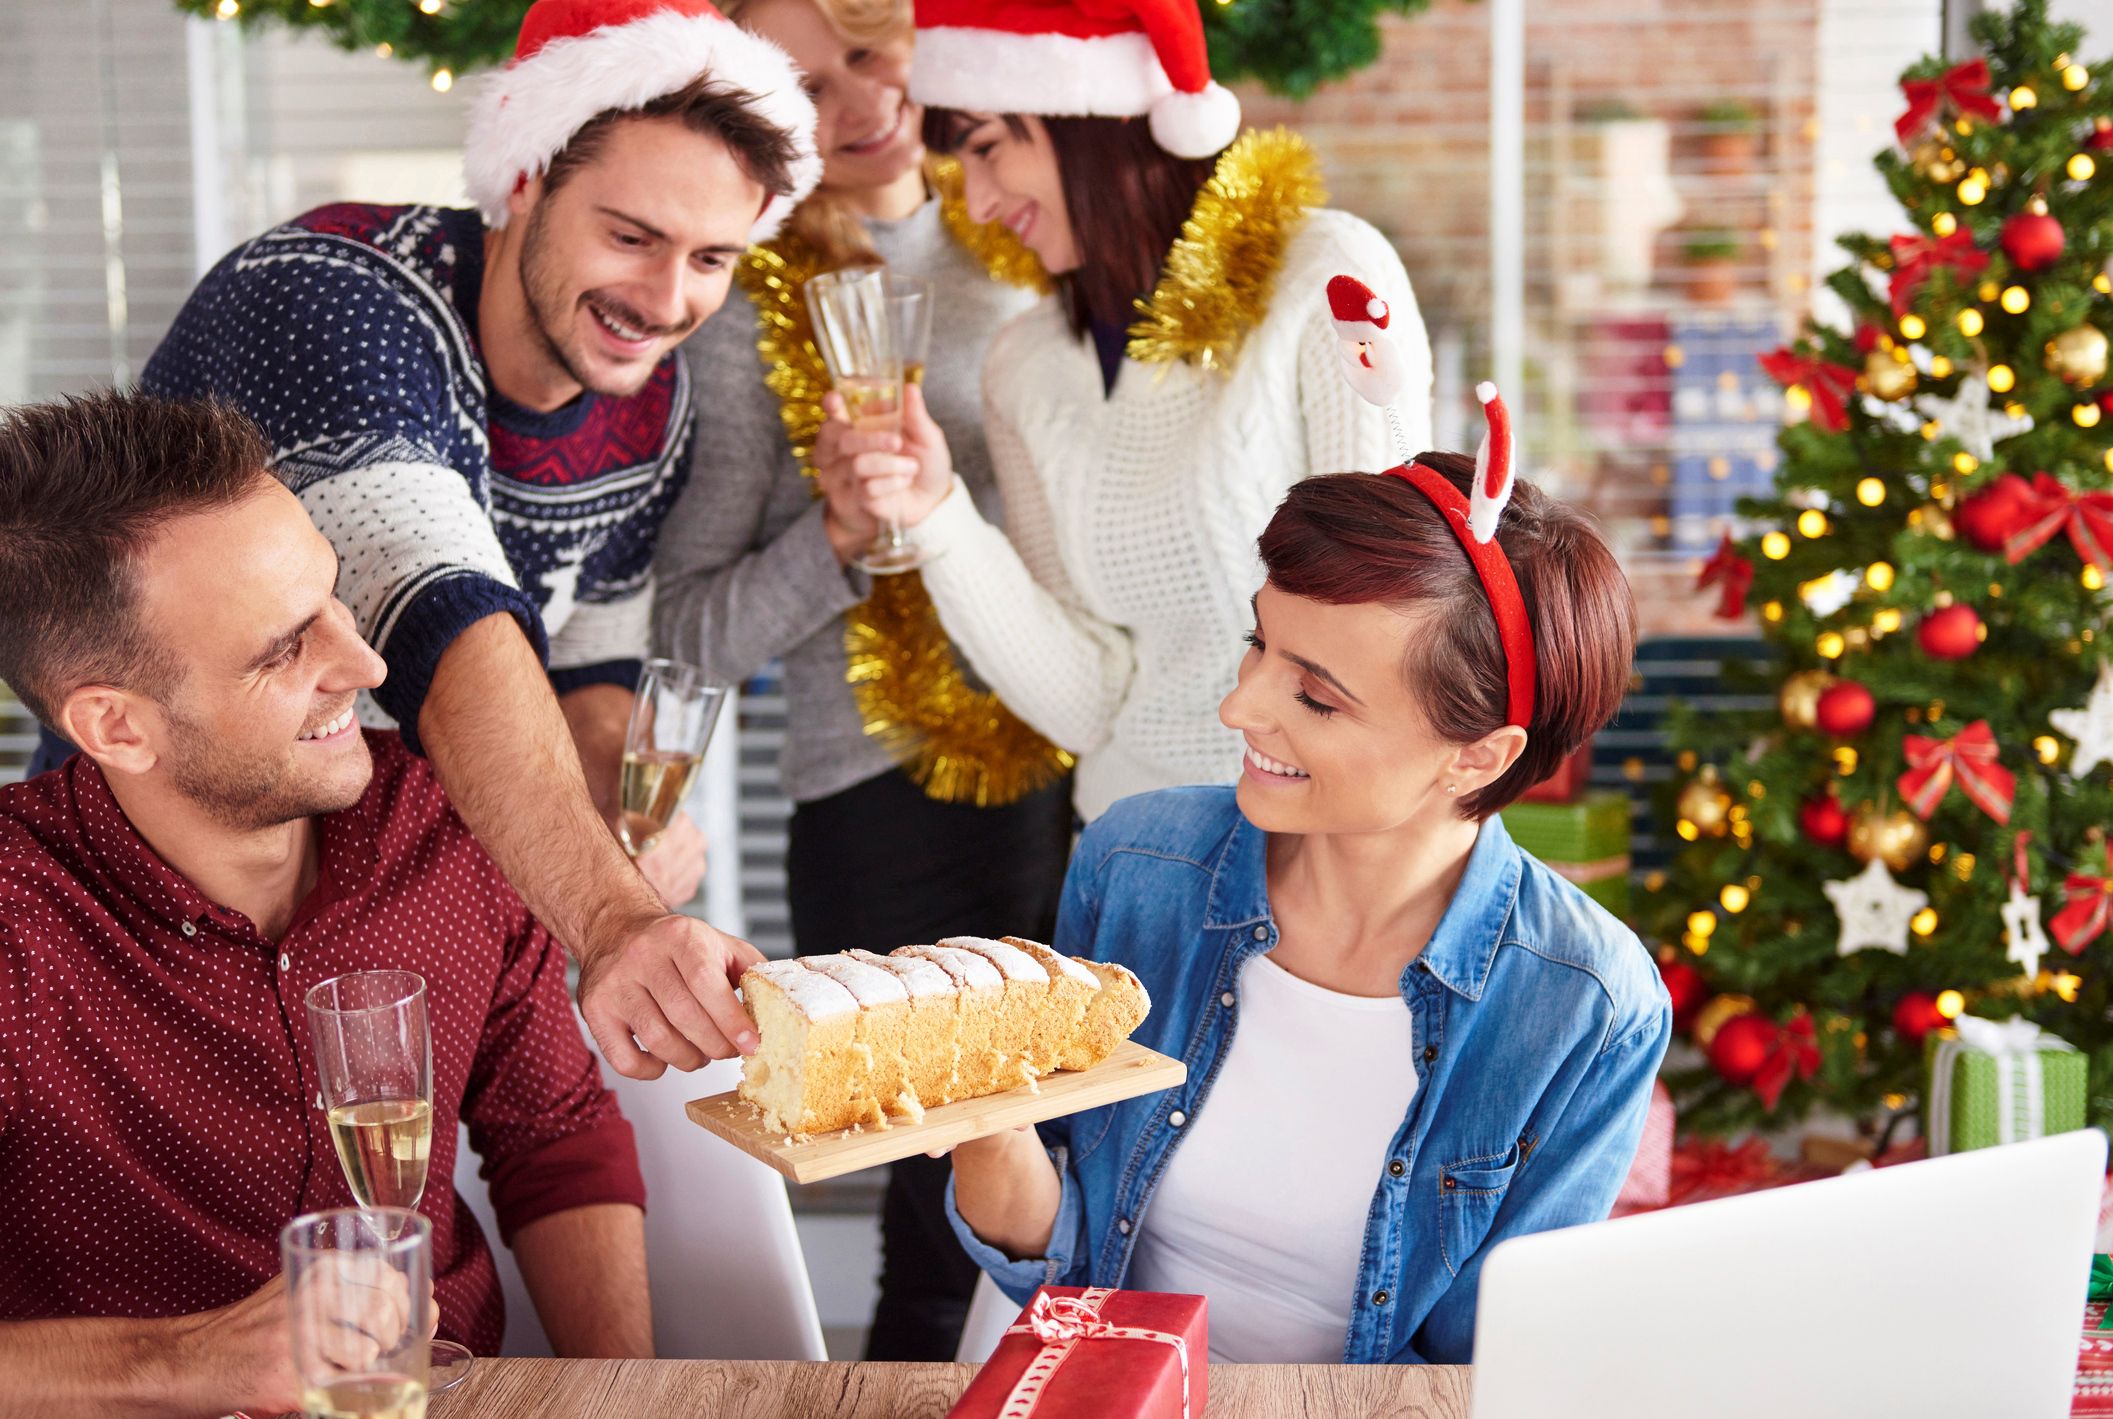 Company Christmas Party Ideas for a Successful Event